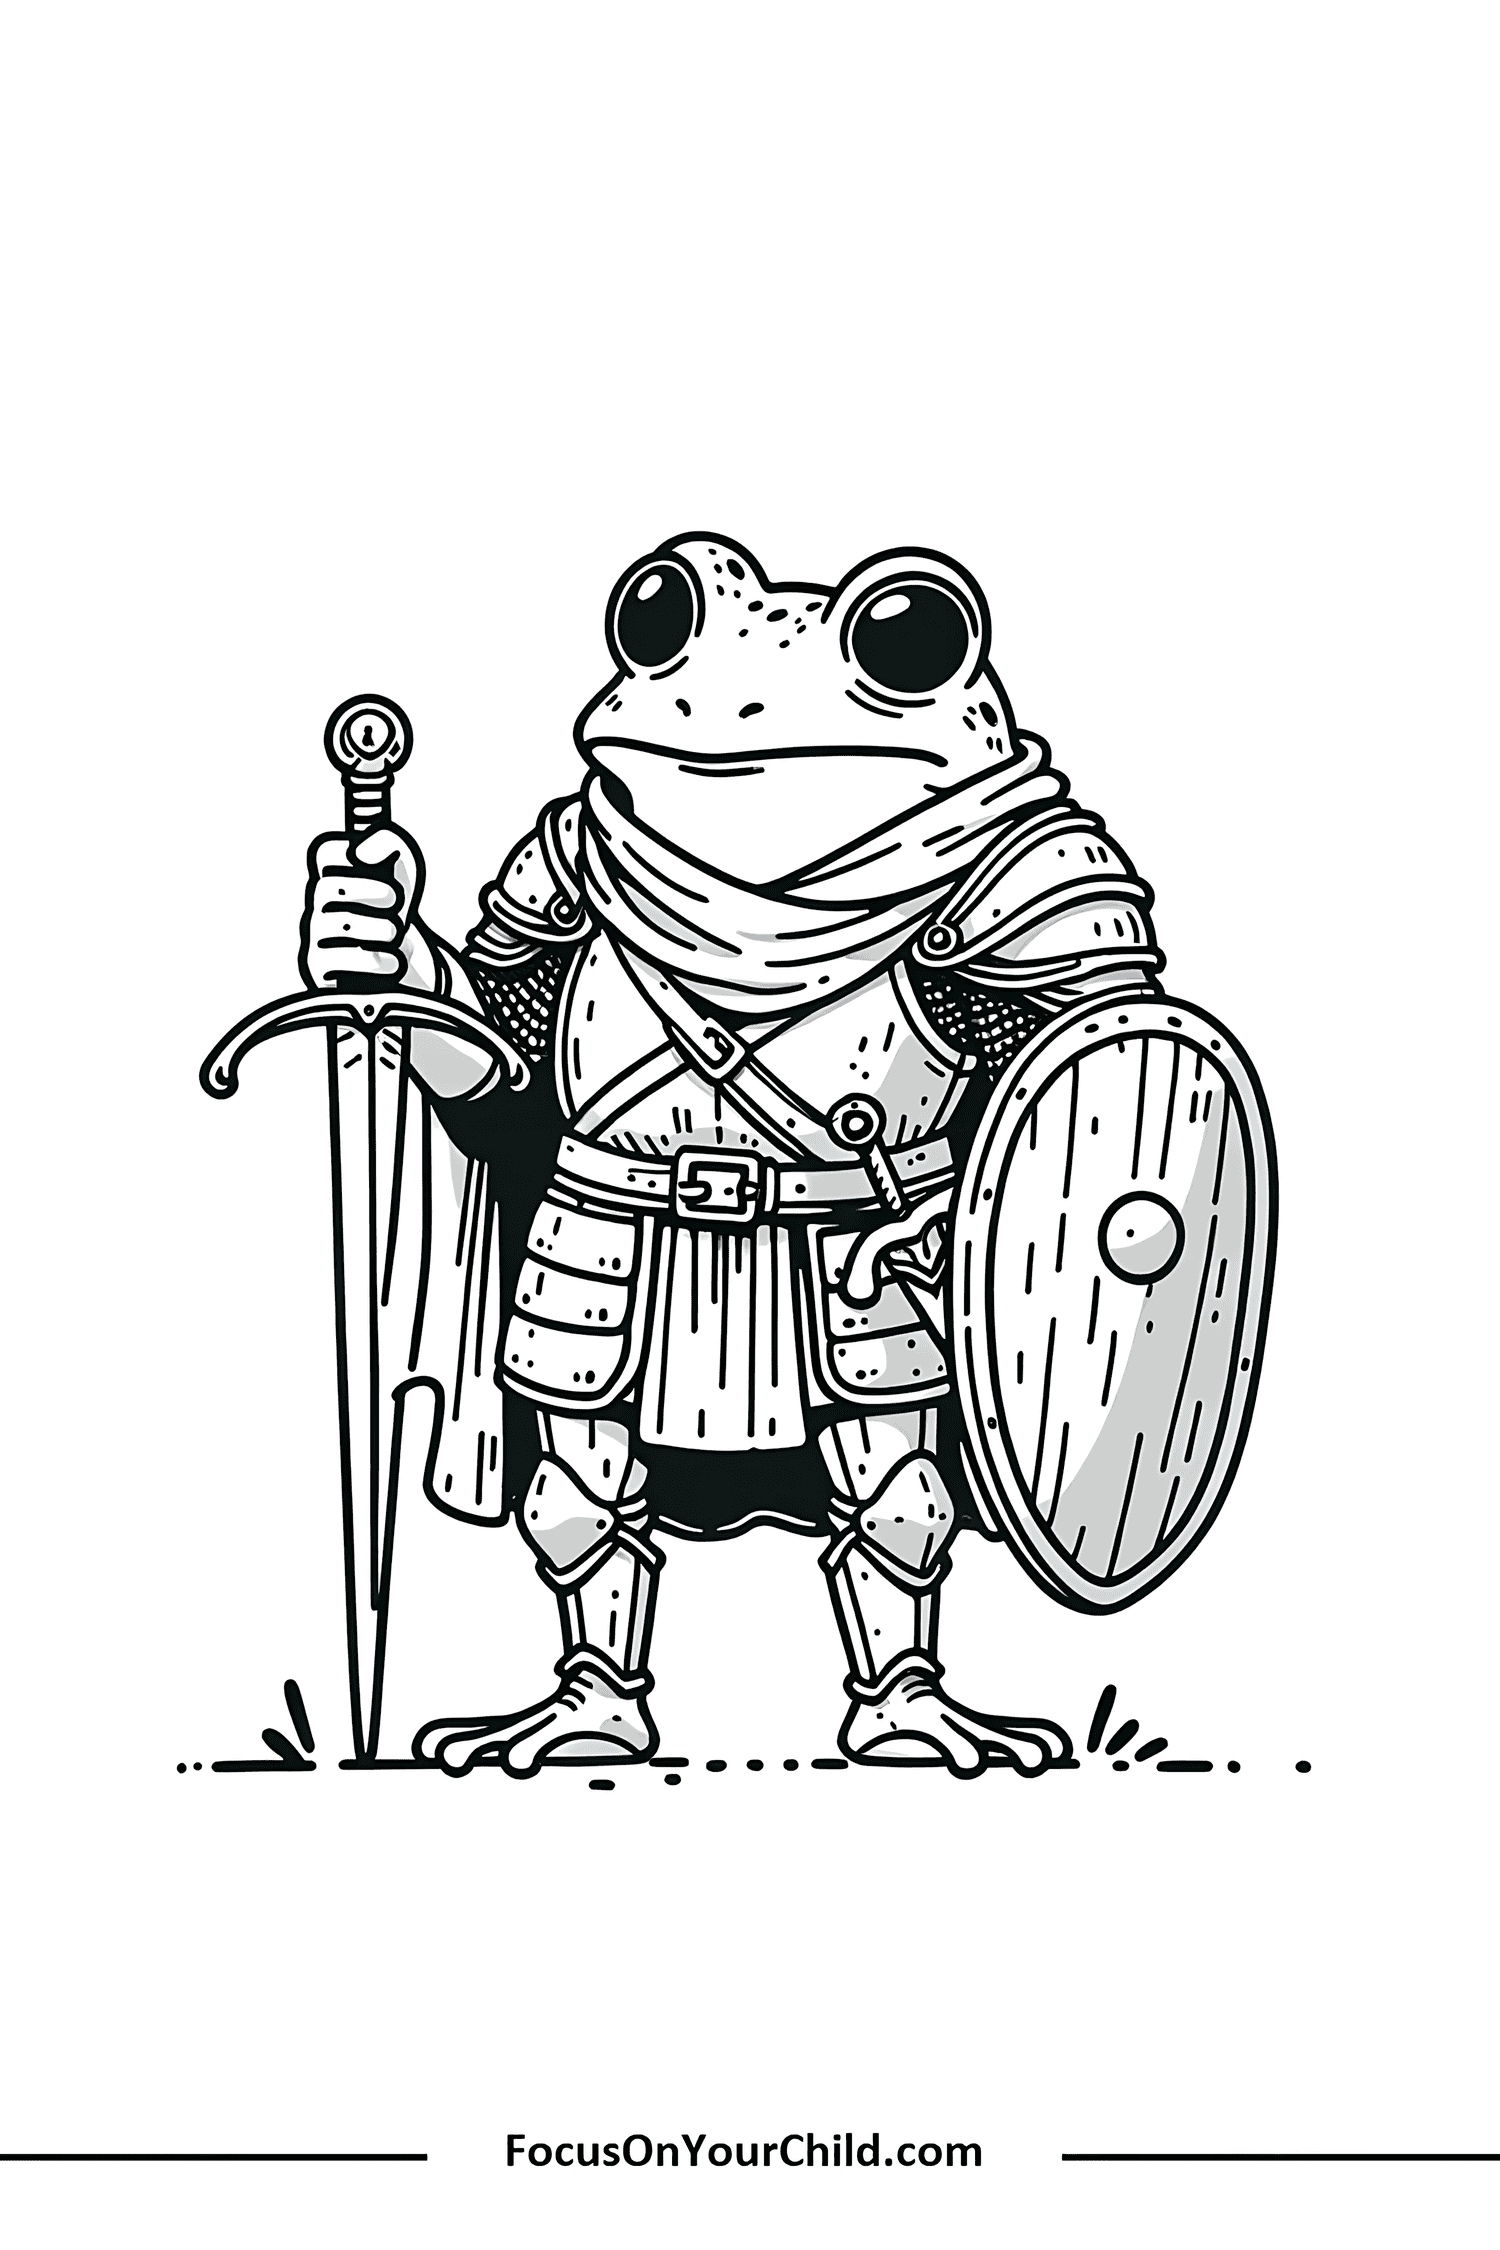 Frog knight in medieval armor with sword and shield illustration.